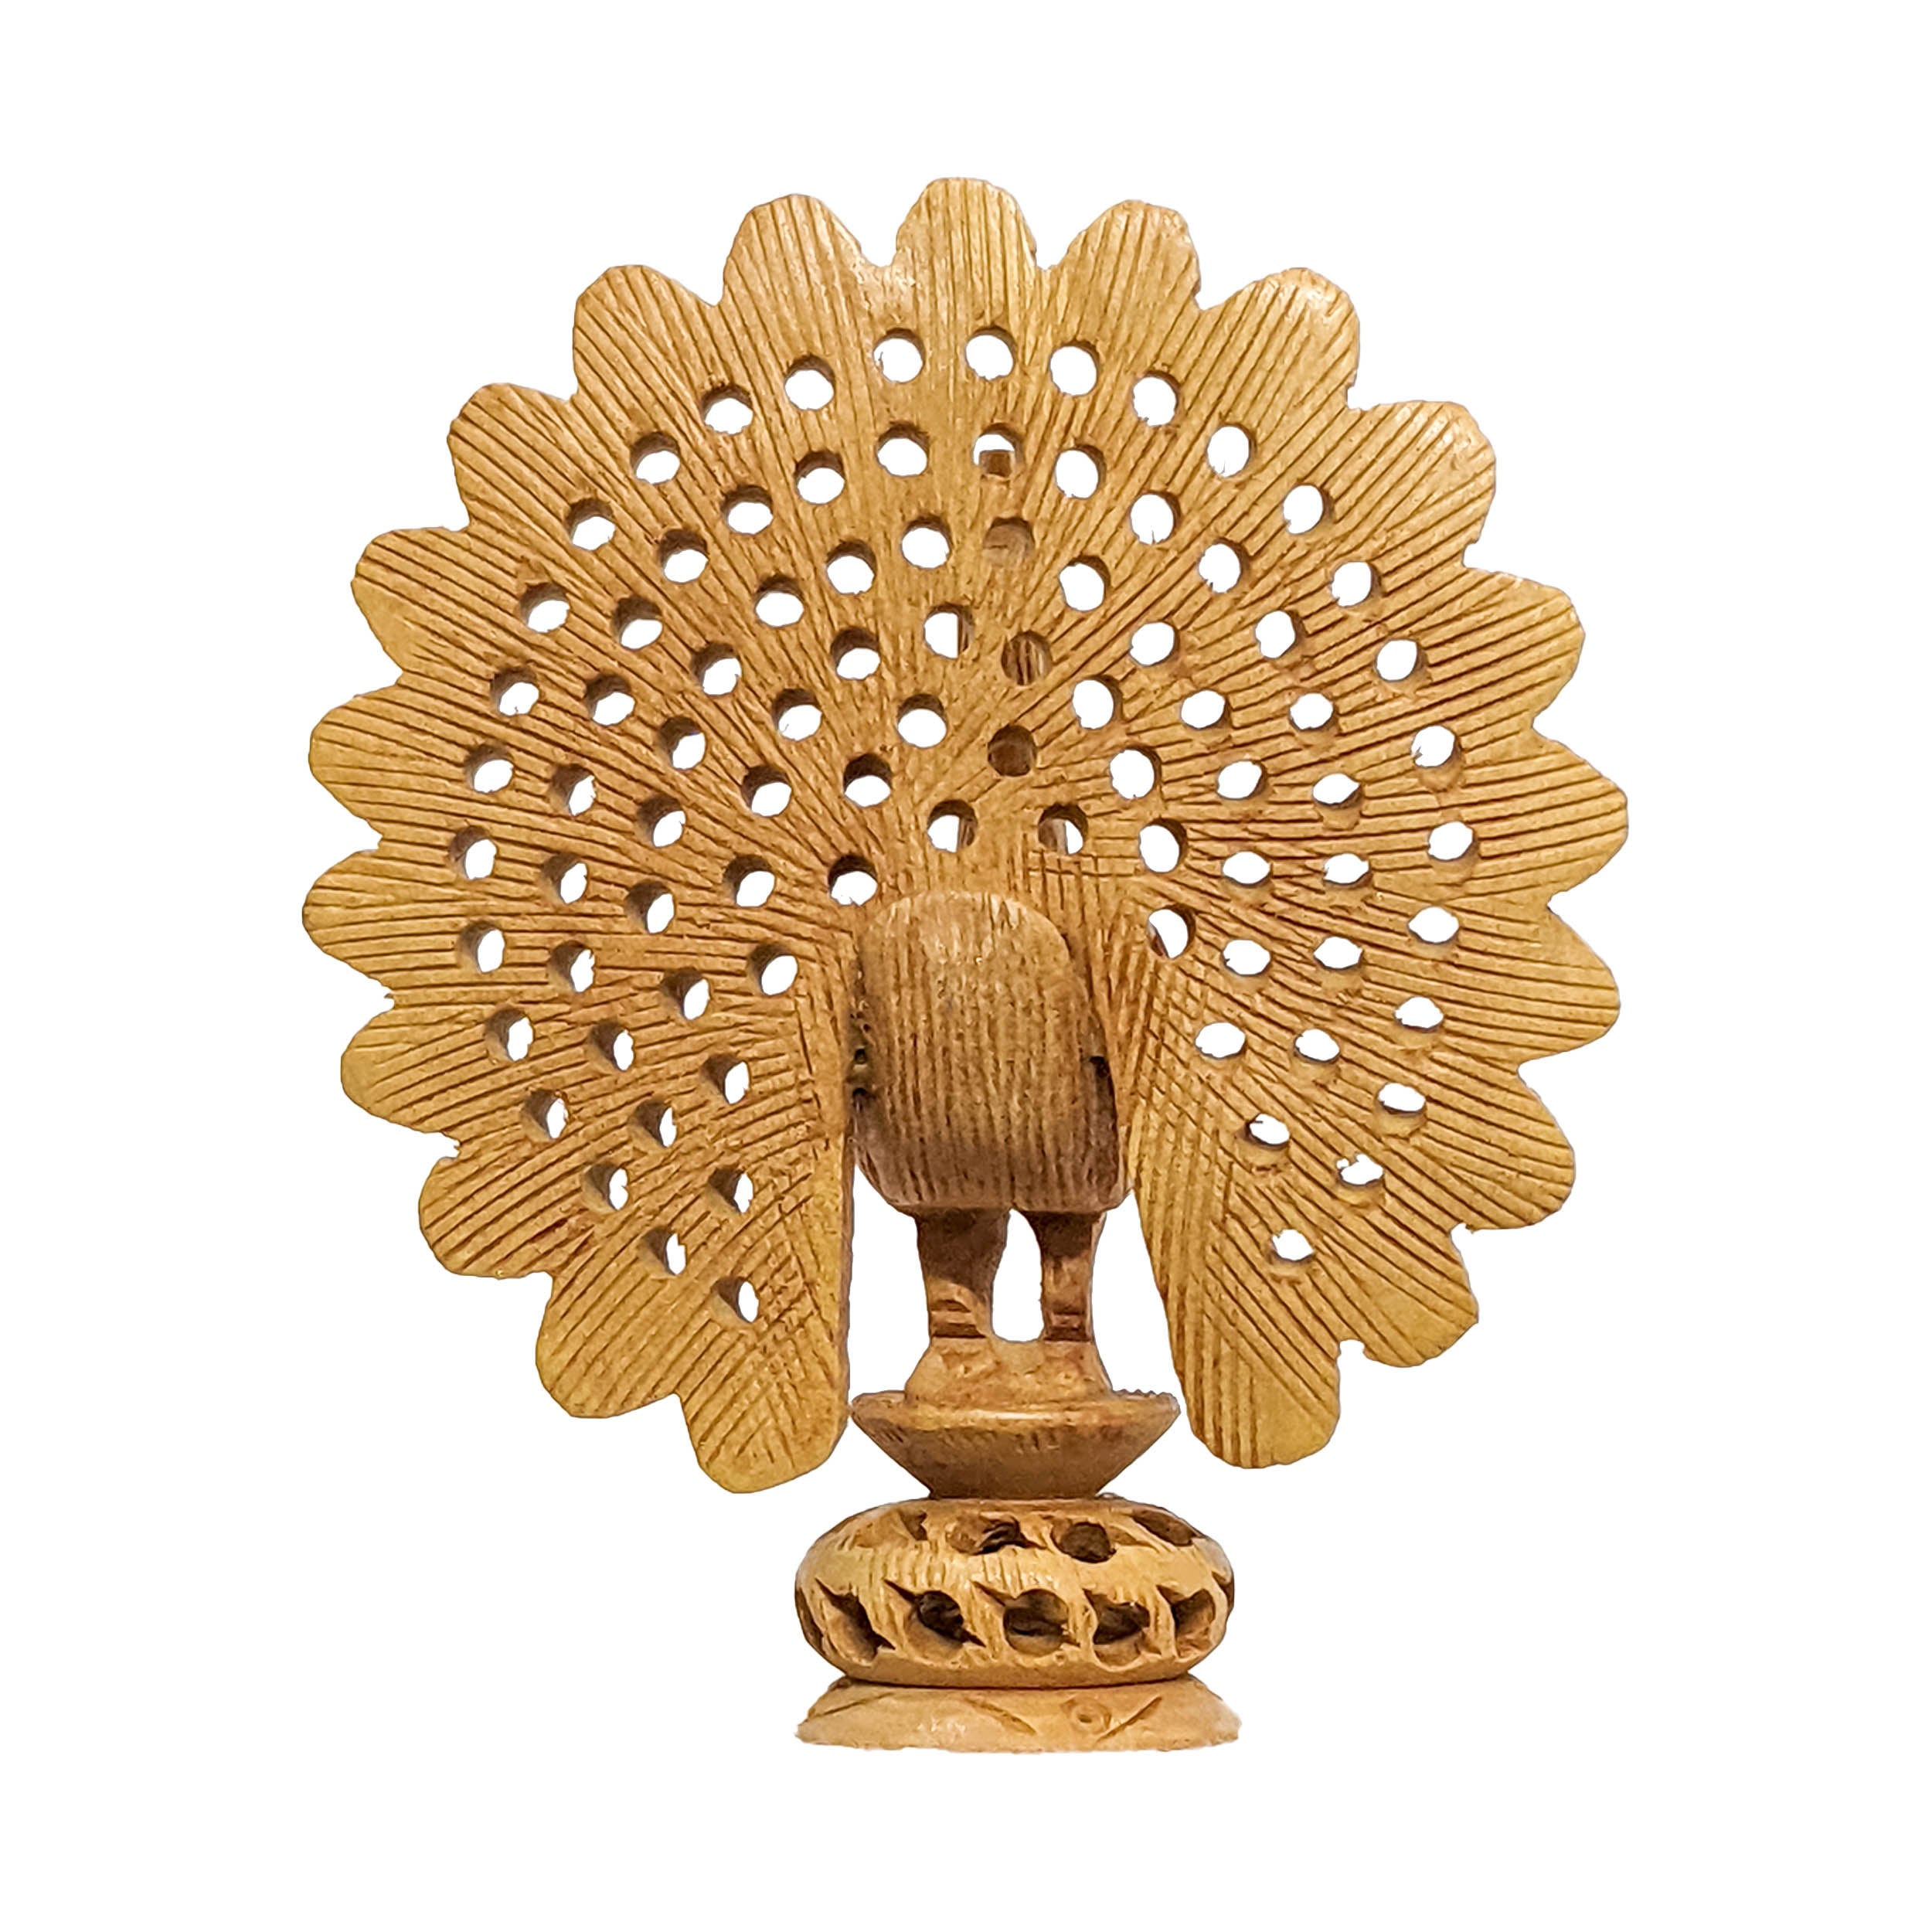 Add an Artistic Flair to Your Décor with Handcrafted Wooden Jaali Dancing Sculpture Peacock